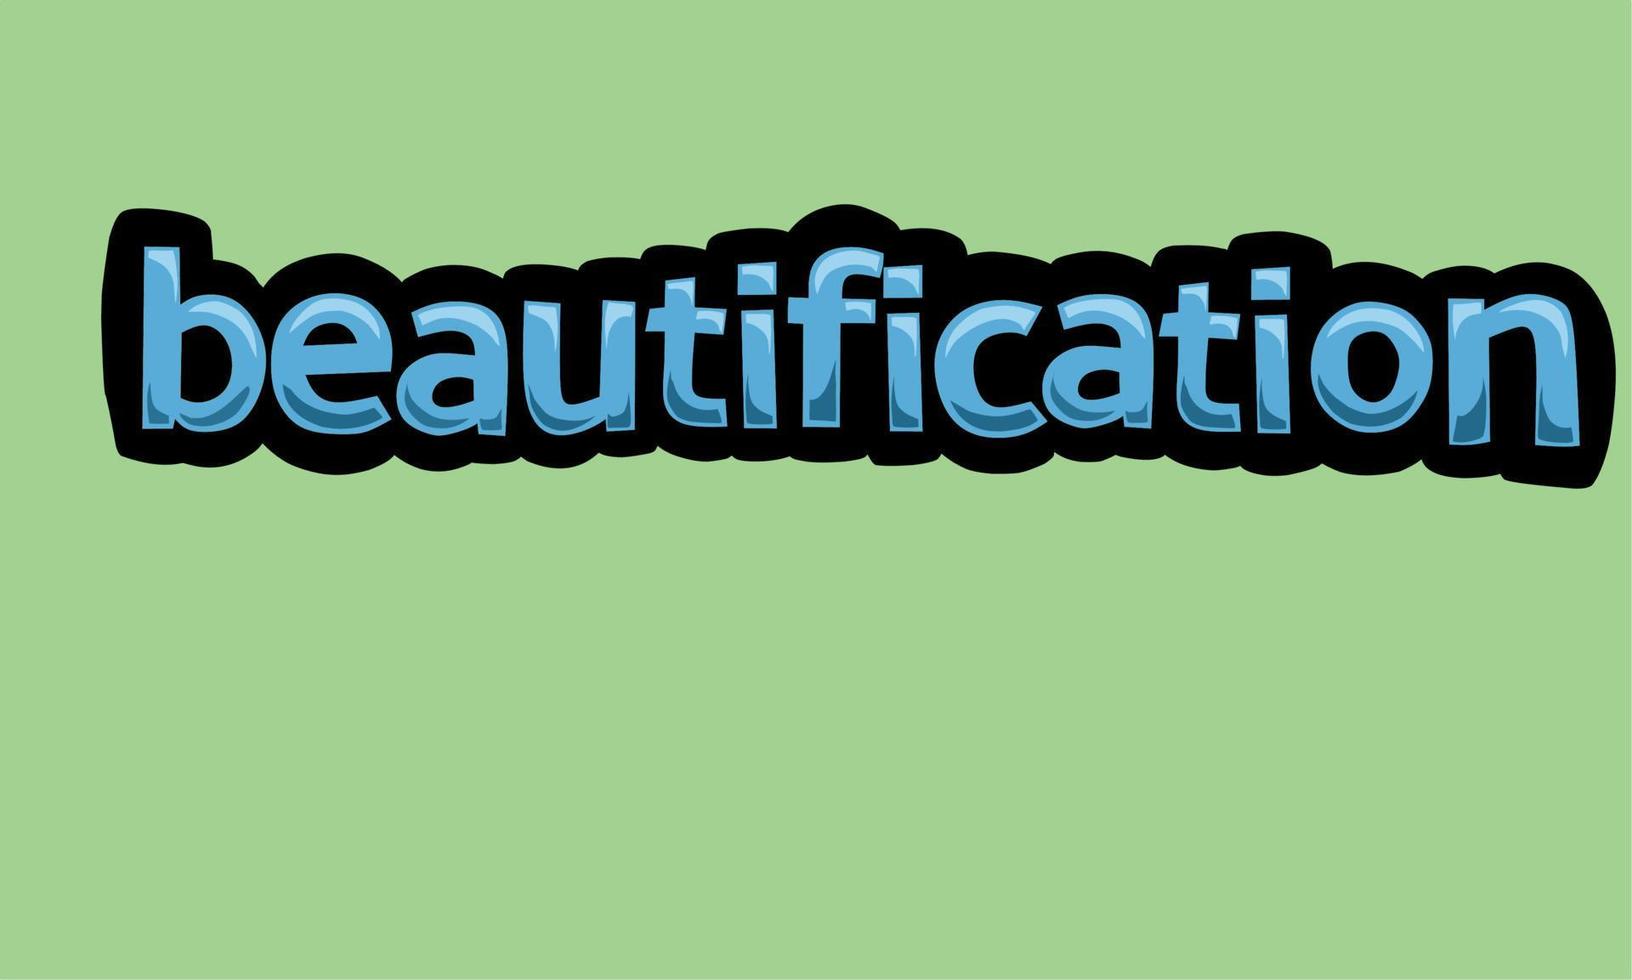 beautification writing vector design on a green background